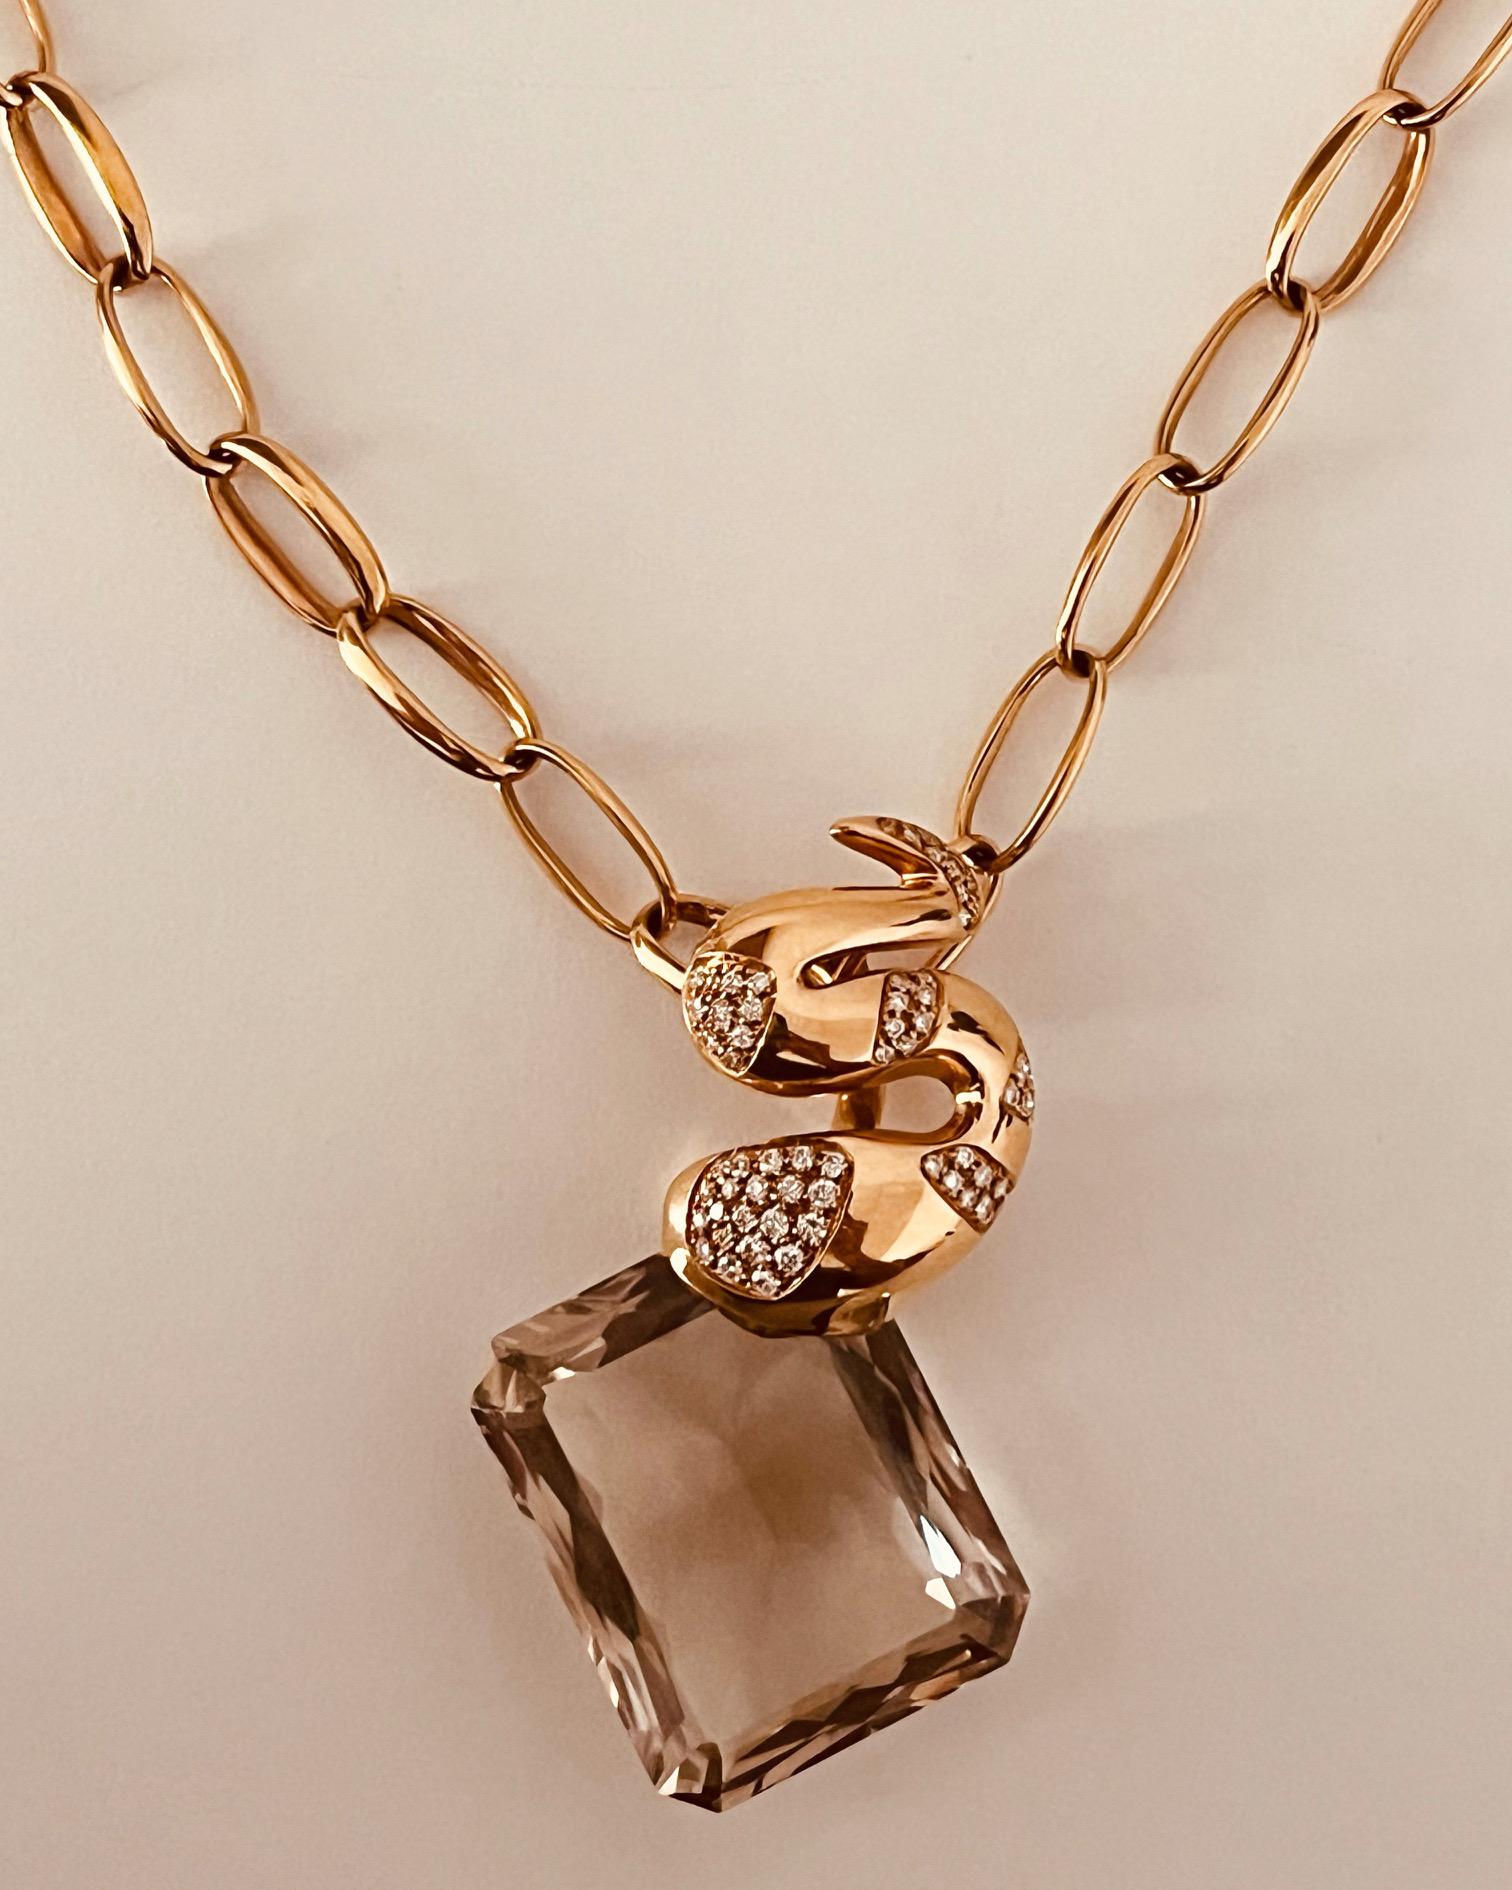 18 carat pink gold long chain. The oval open links suspending a diamond set snake to a rectangular quartz. Total weight: 81.9 grames. Length of chain 75cm. Pendant dimensions: 6cmX4cm. Diamond weight: approx. 1.8 carat.
Hallmarks: signed Gavello 750